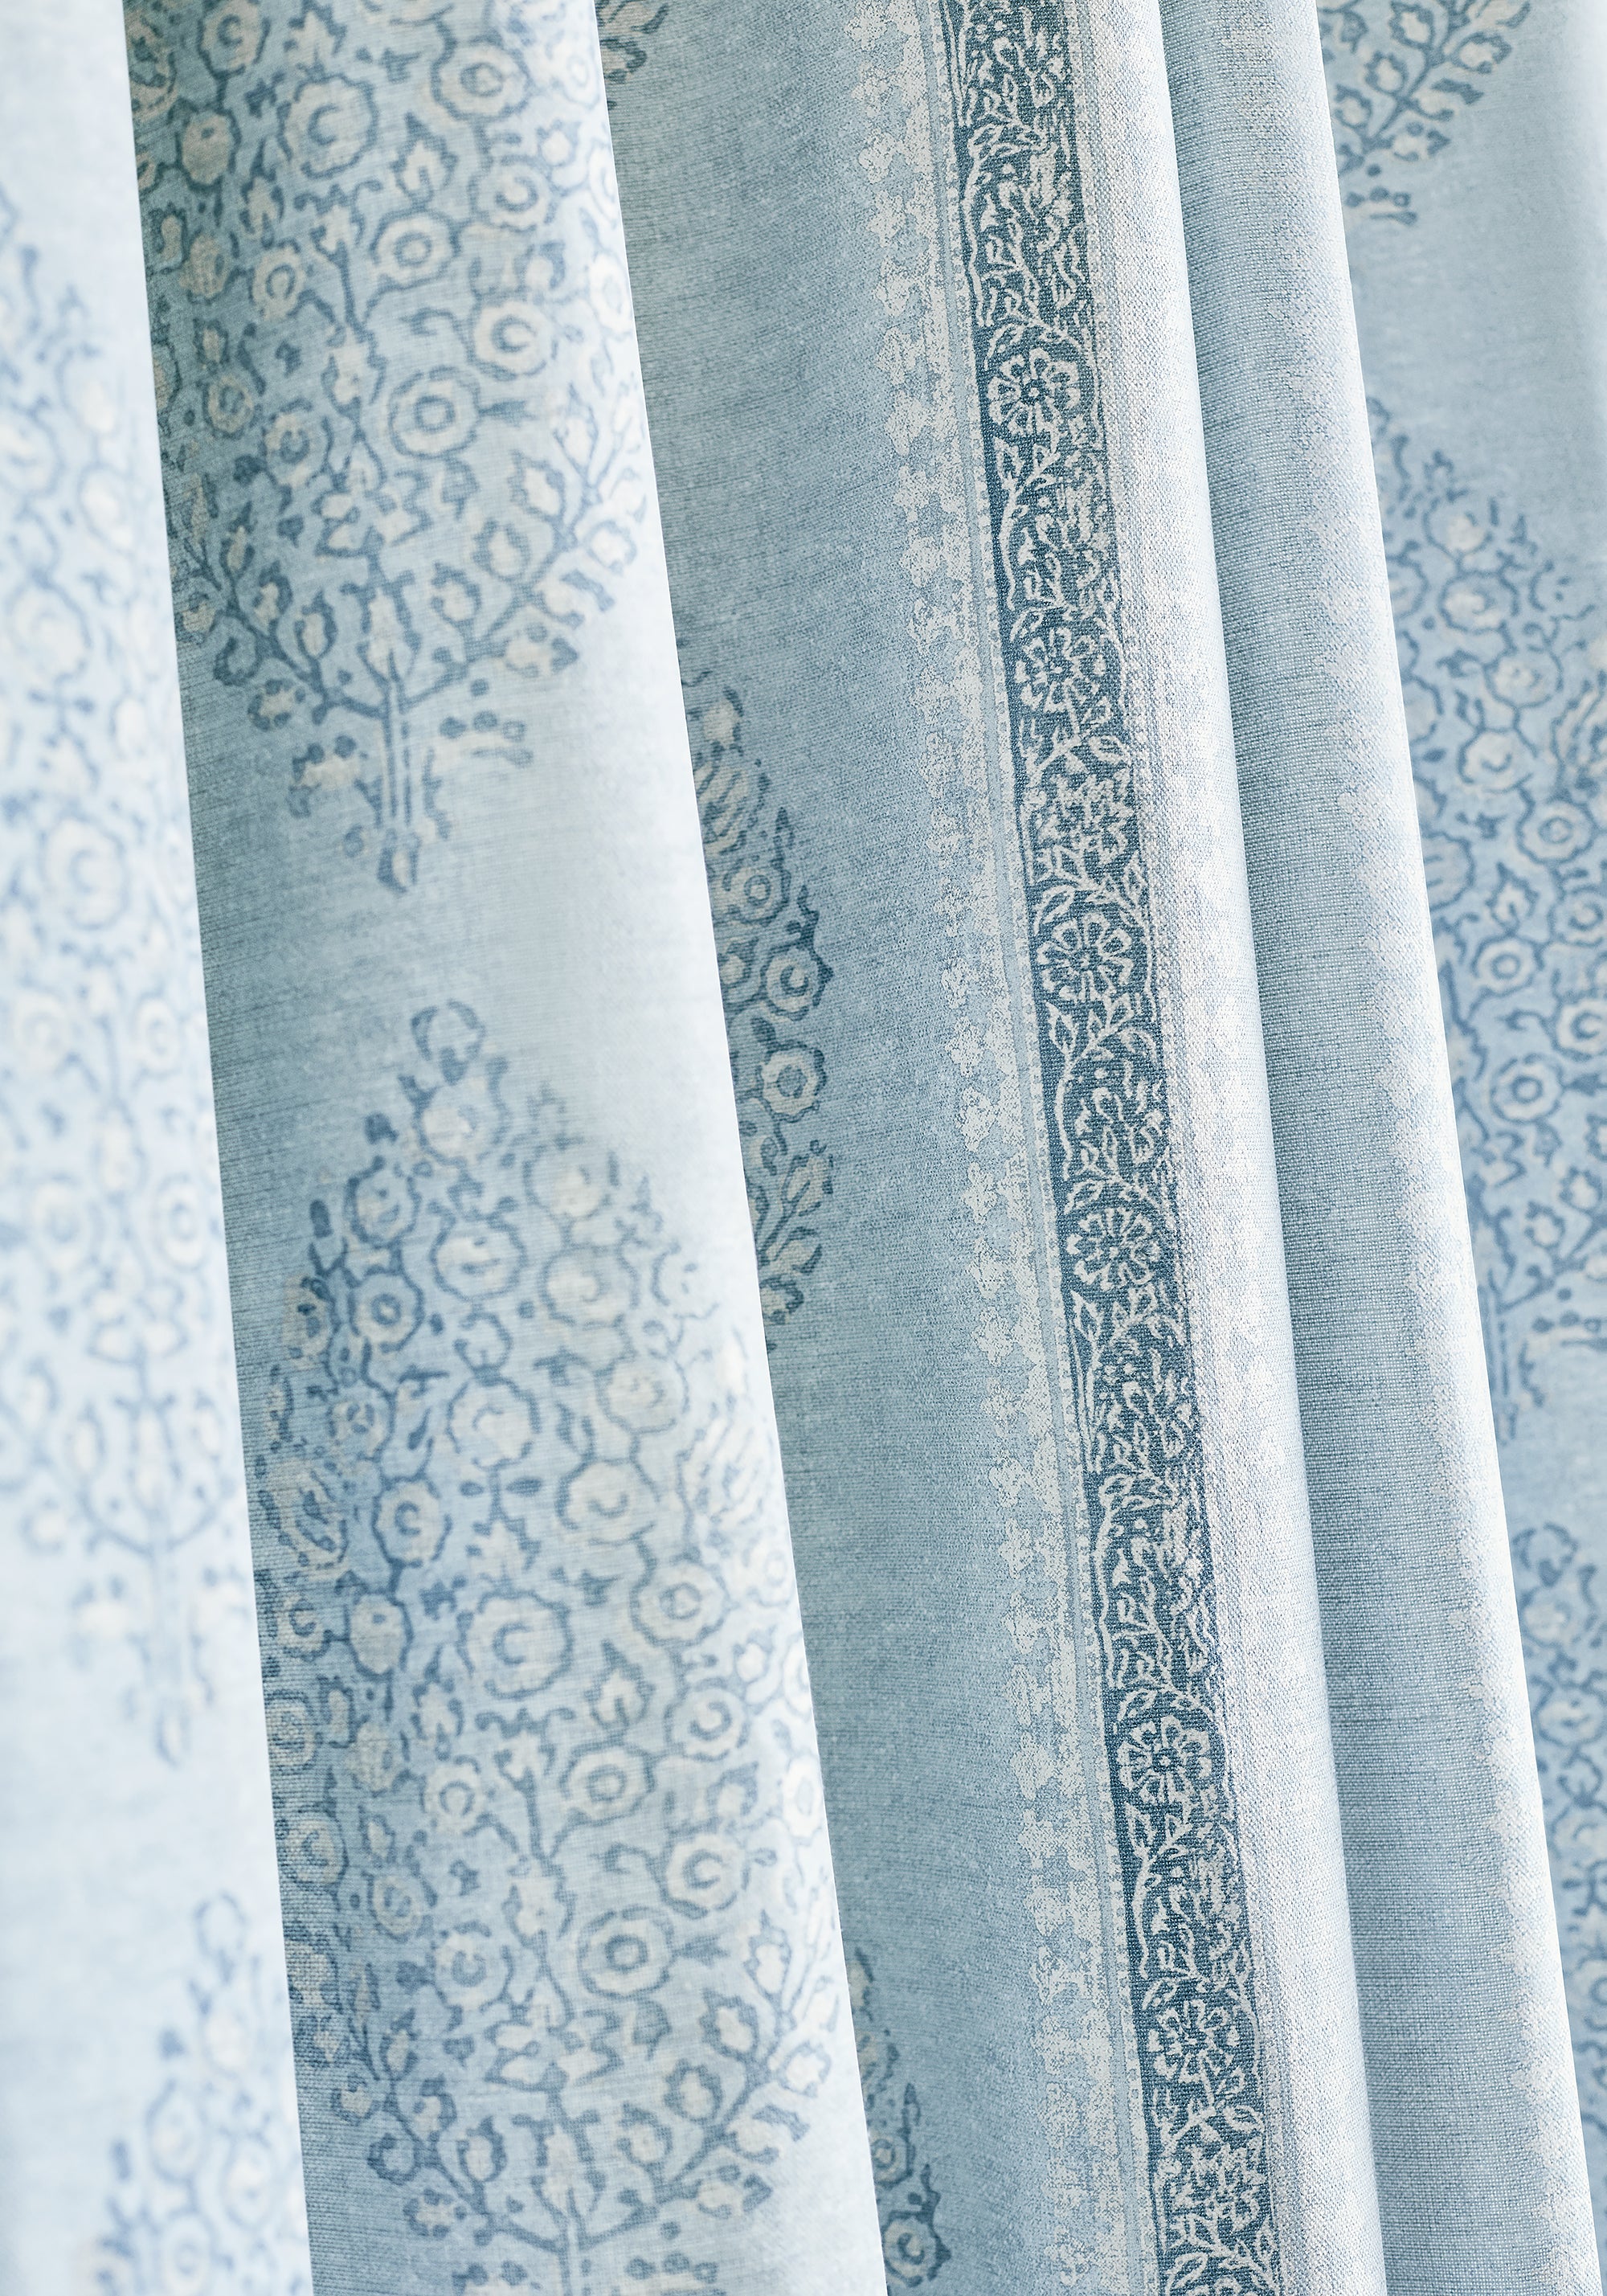 Detailed Chappana printed fabric in slate blue color, pattern number F910235 of the Thibaut Colony collection